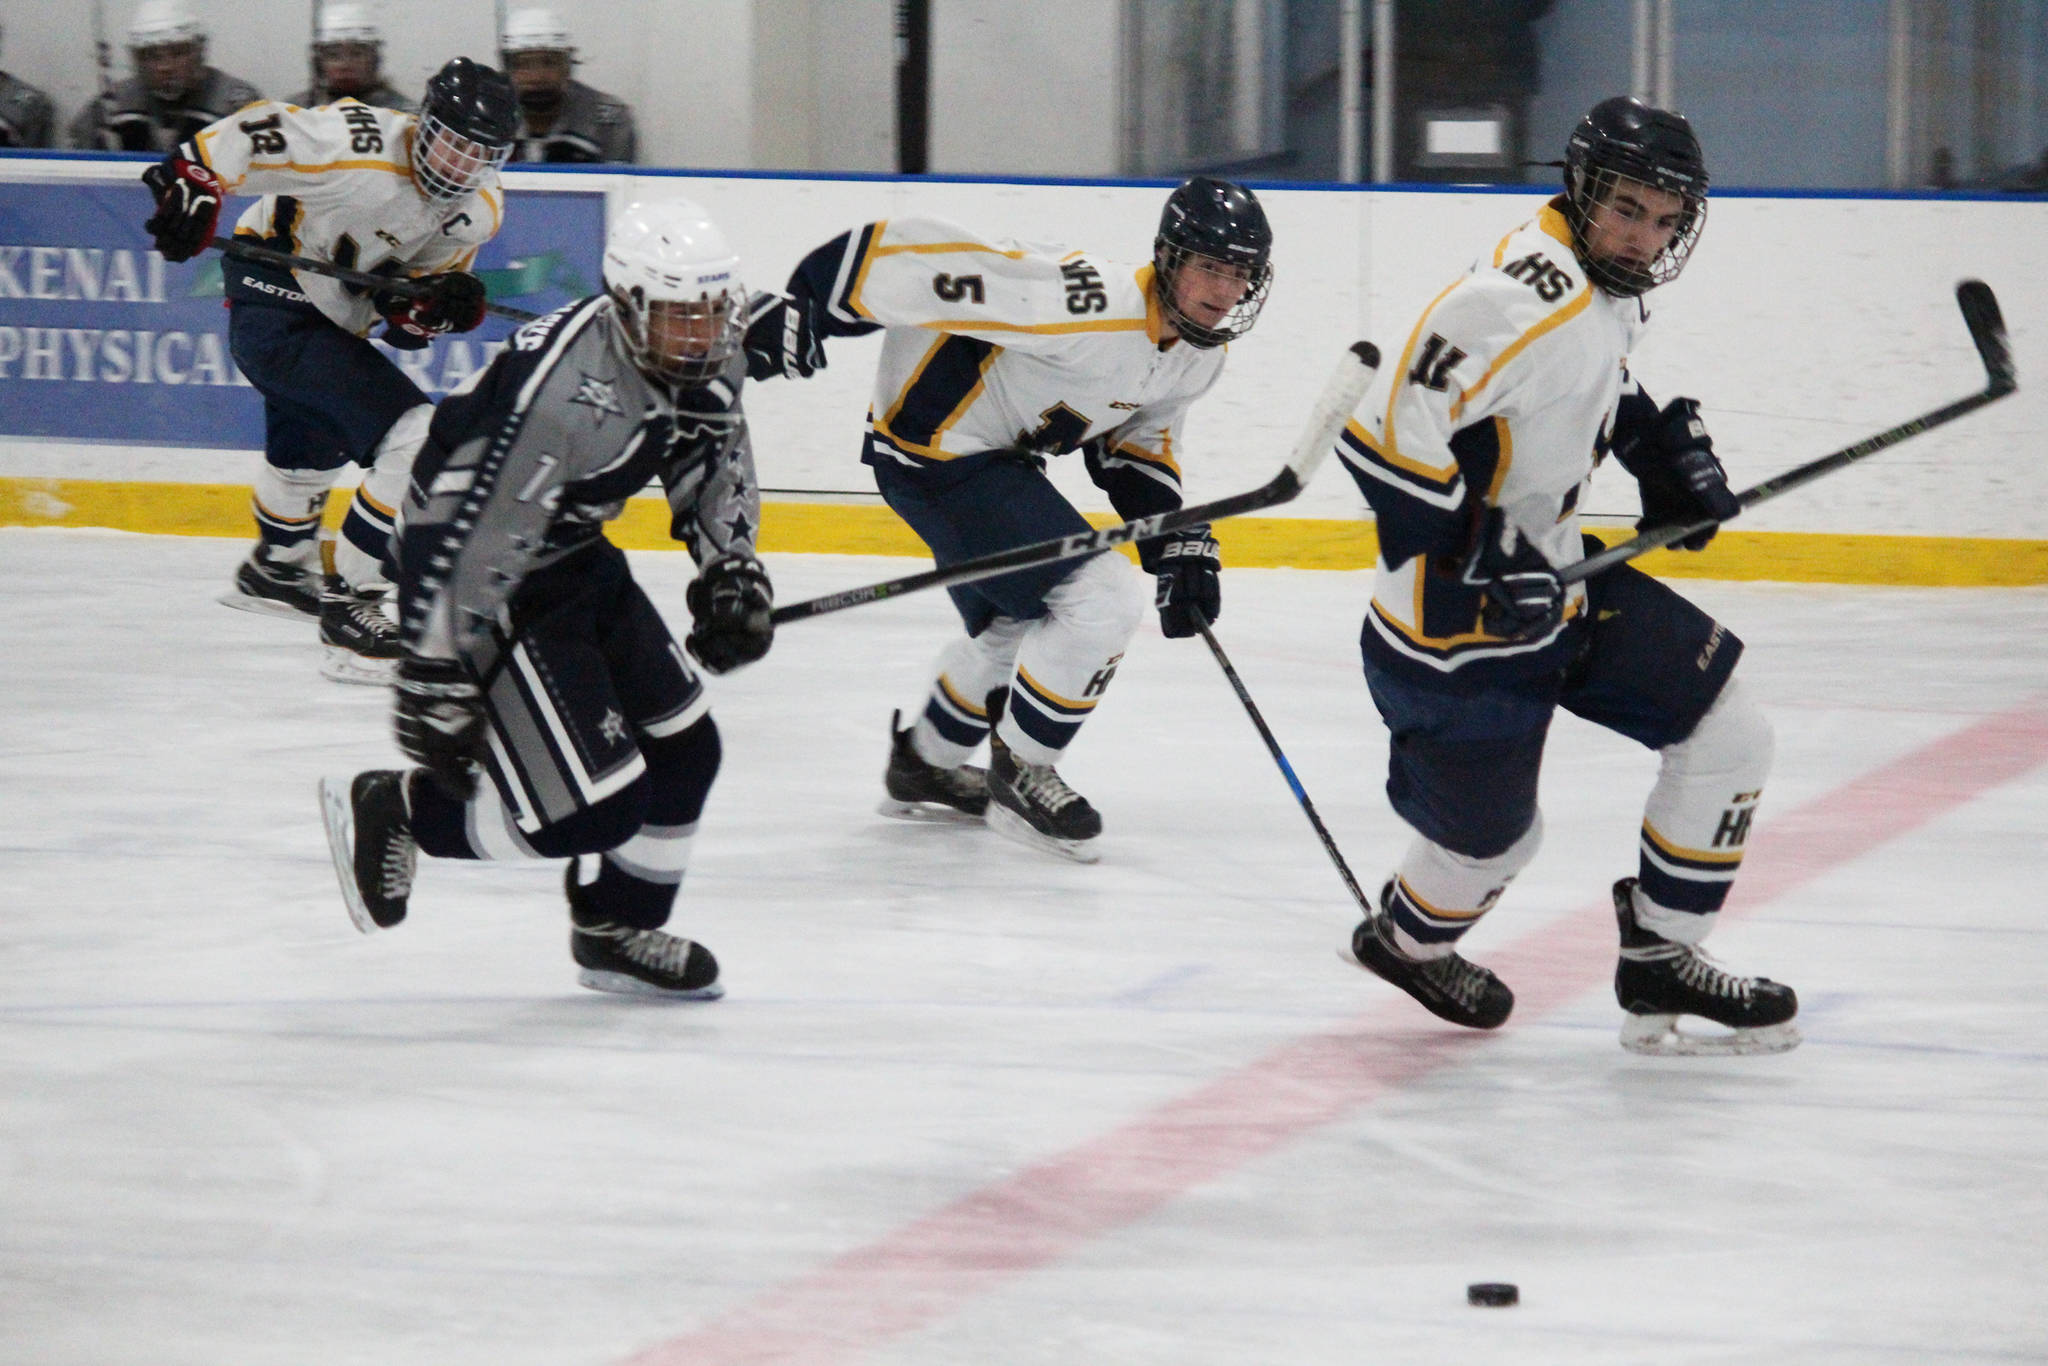 Homer hockey players Dimitry Kuzmin (12), Douglas Dean (5) and Charlie Menke (11) chase after the puck along with Soldotna’s Alex Montague during their game Tuesday, Jan. 16, 2018 at Kevin Bell Arena in Homer, Alaska. The Mariners beat the Stars 10-1. (Photo by Megan Pacer/Homer News)